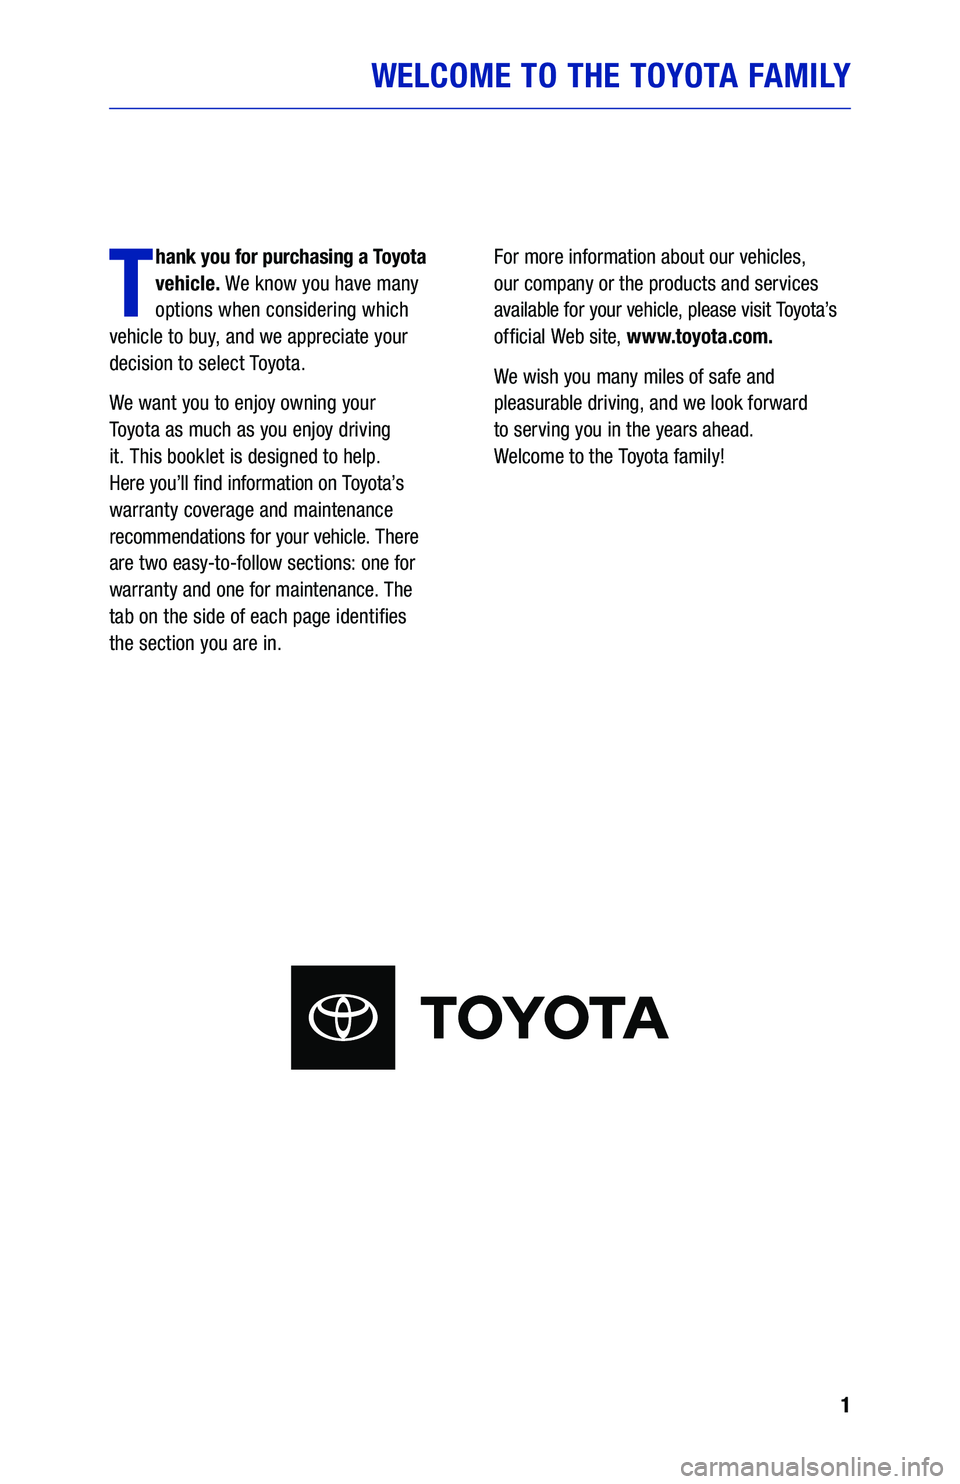 TOYOTA PRIUS 2020  Warranties & Maintenance Guides (in English) 1
WELCOME TO THE TOYOTA FAMILY
T
hank you for purchasing a Toyota 
vehicle. We know you have many 
options when considering which  
vehicle to buy, and we appreciate your 
decision to select Toyota.
W